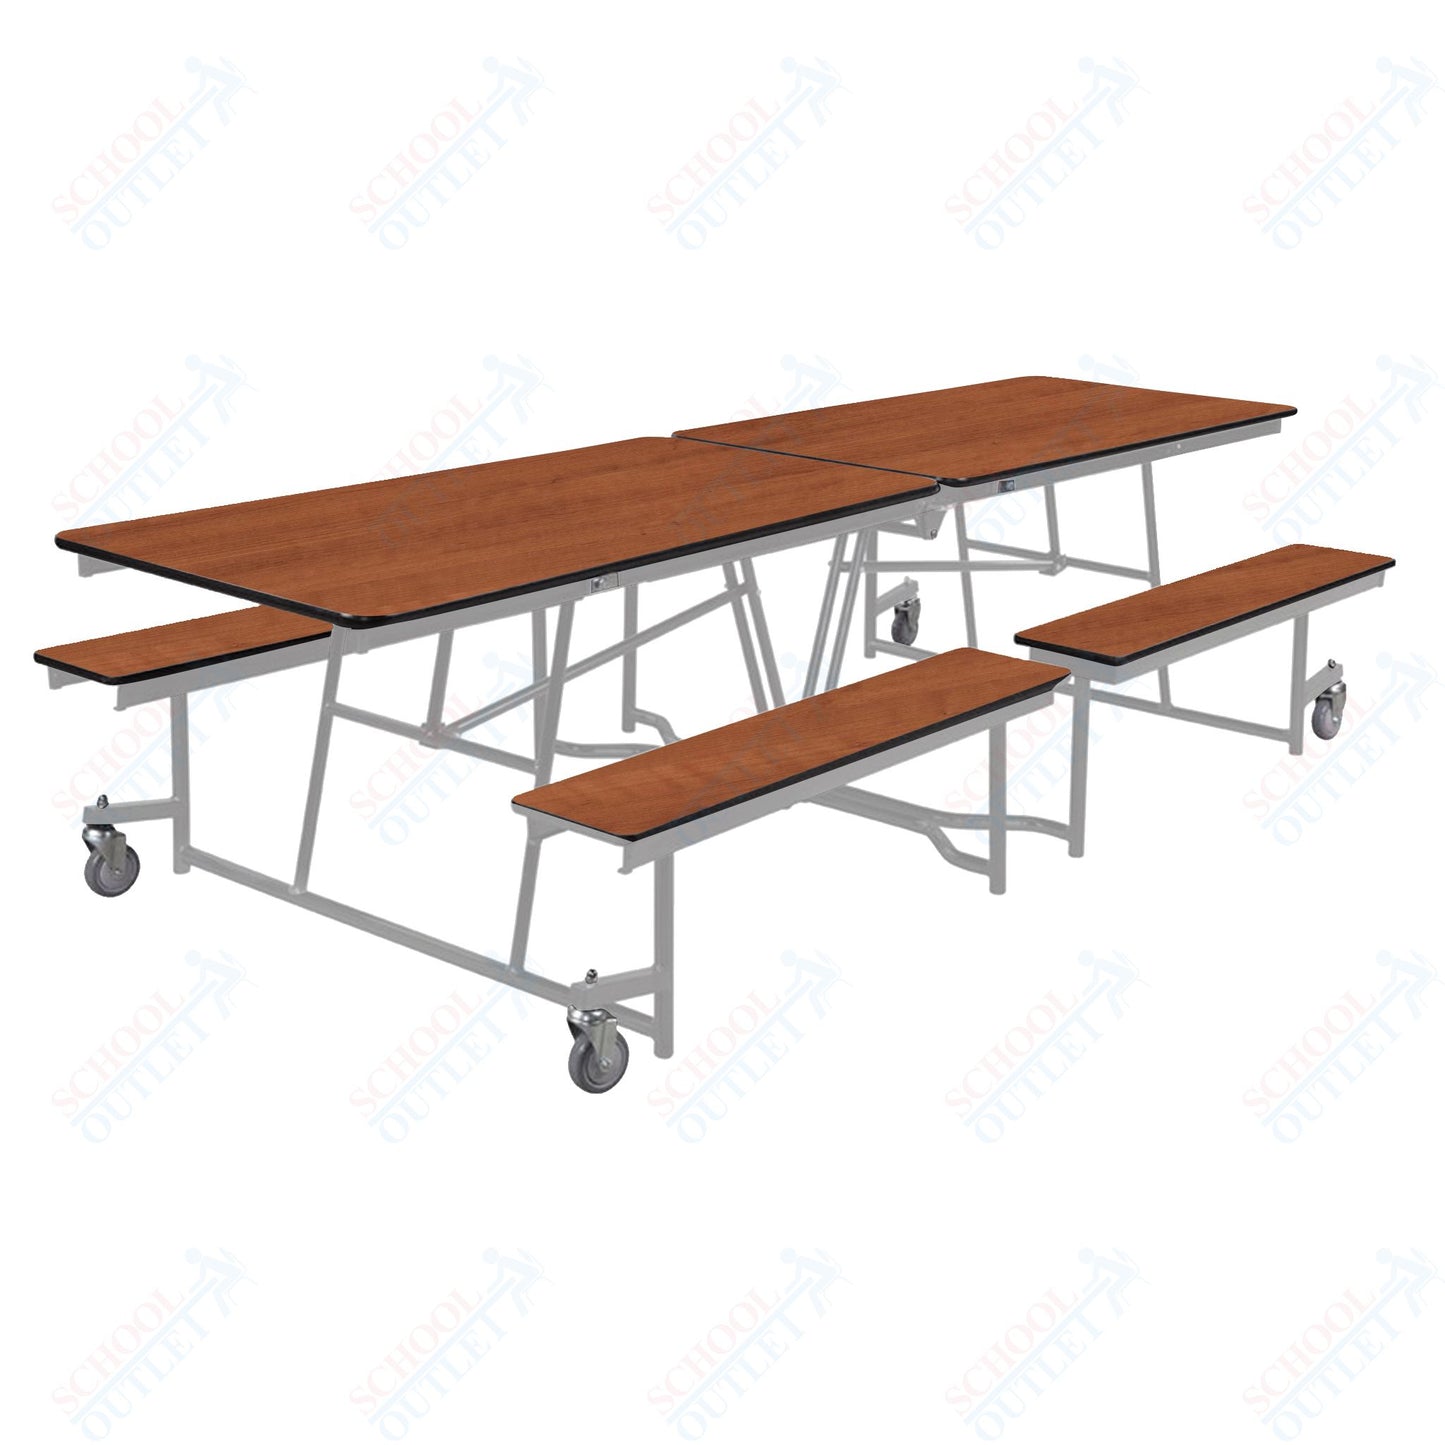 NPS Mobile Cafeteria Table - 30" W x 10' L - Seats 8-12 (National Public Seating NPS-MTFB10)